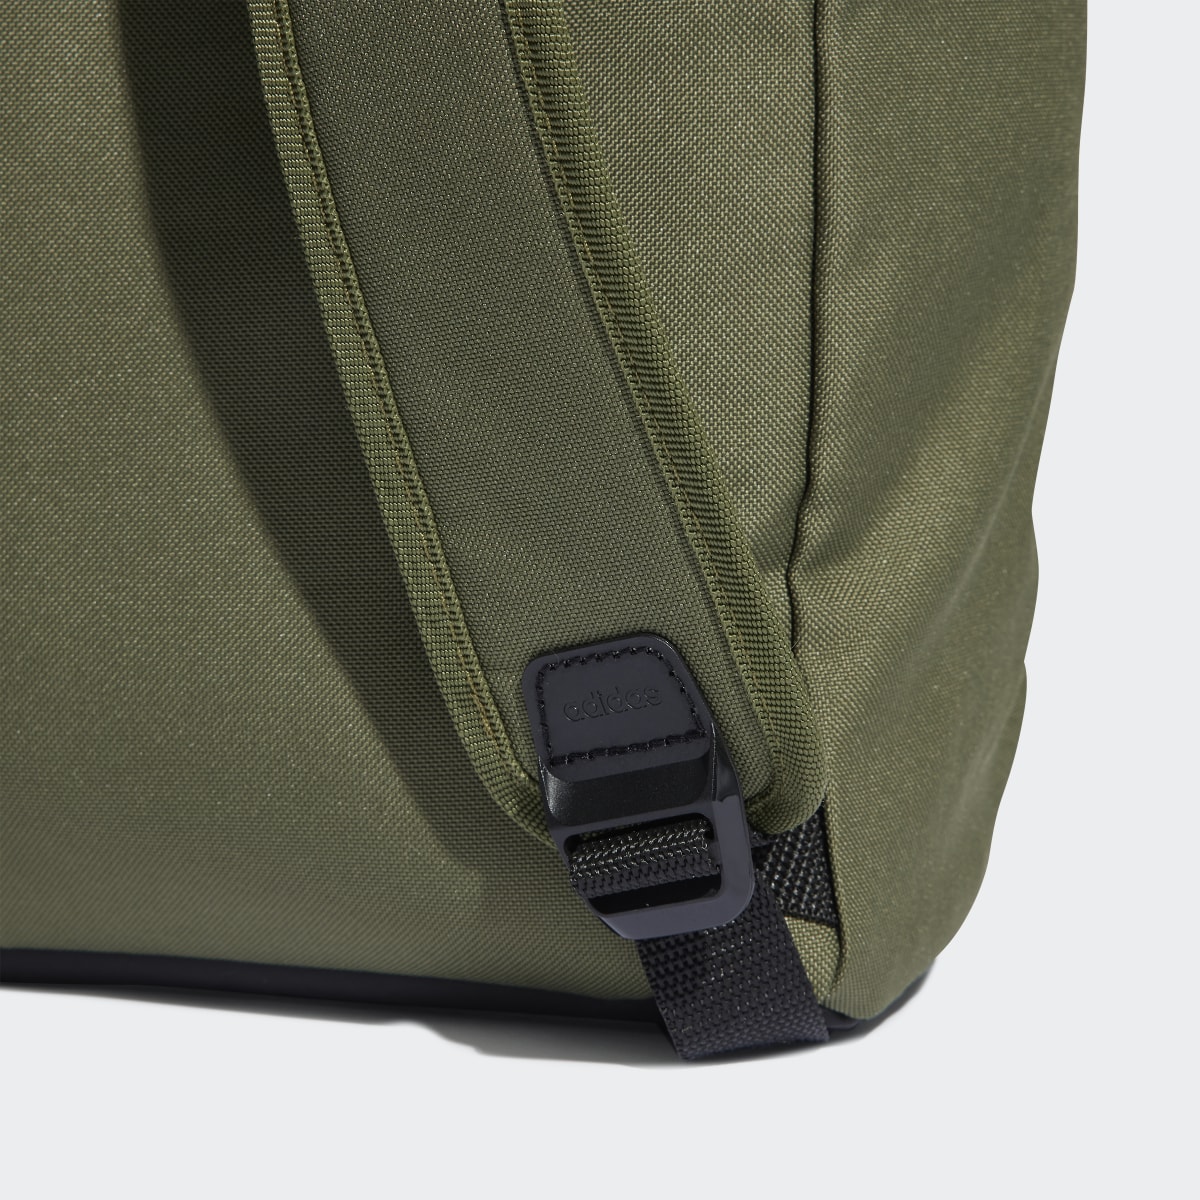 Adidas Linear Classic Daily Backpack. 5